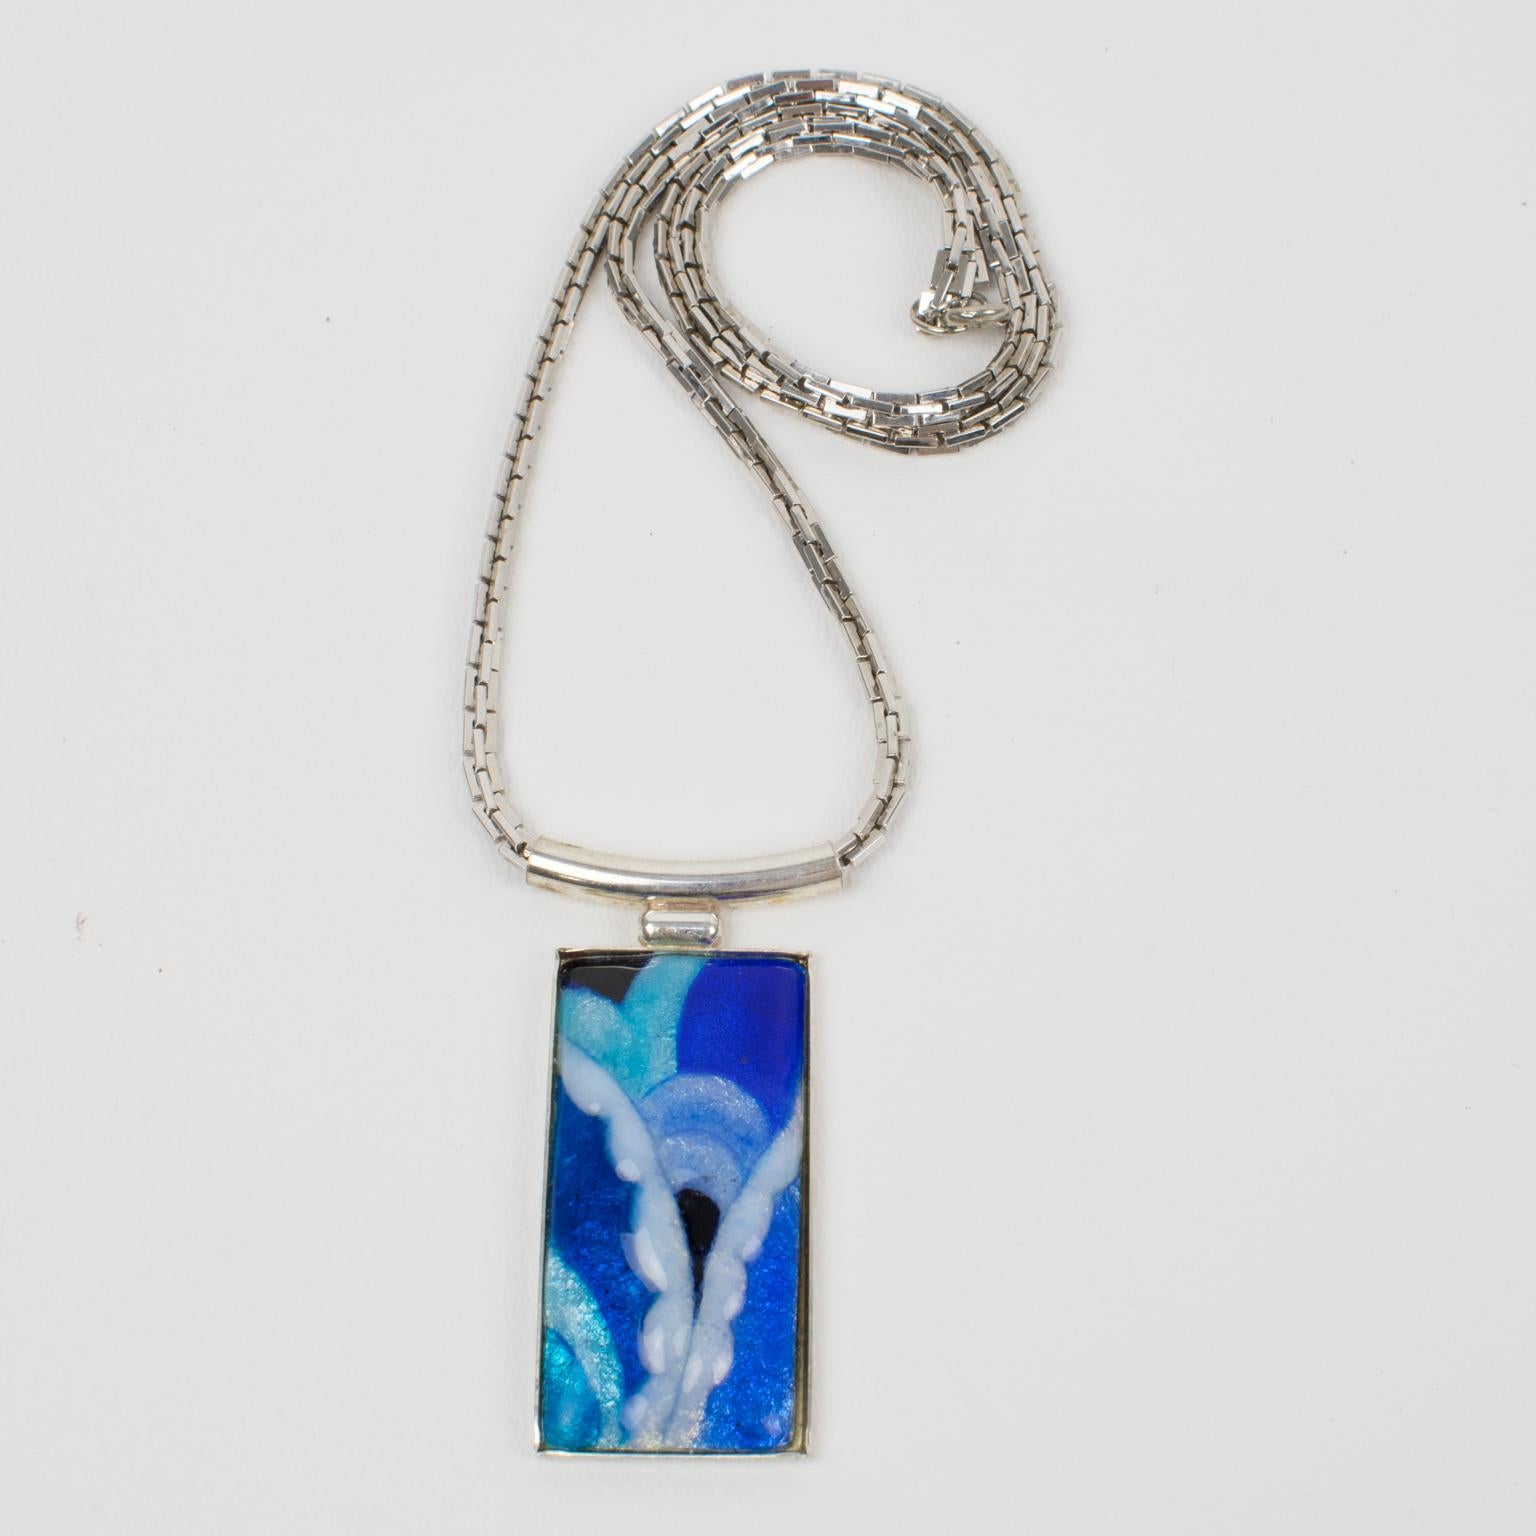 Camille Faure School Limoges Blue Enamel Geometric Pendant Necklace In Excellent Condition For Sale In Atlanta, GA